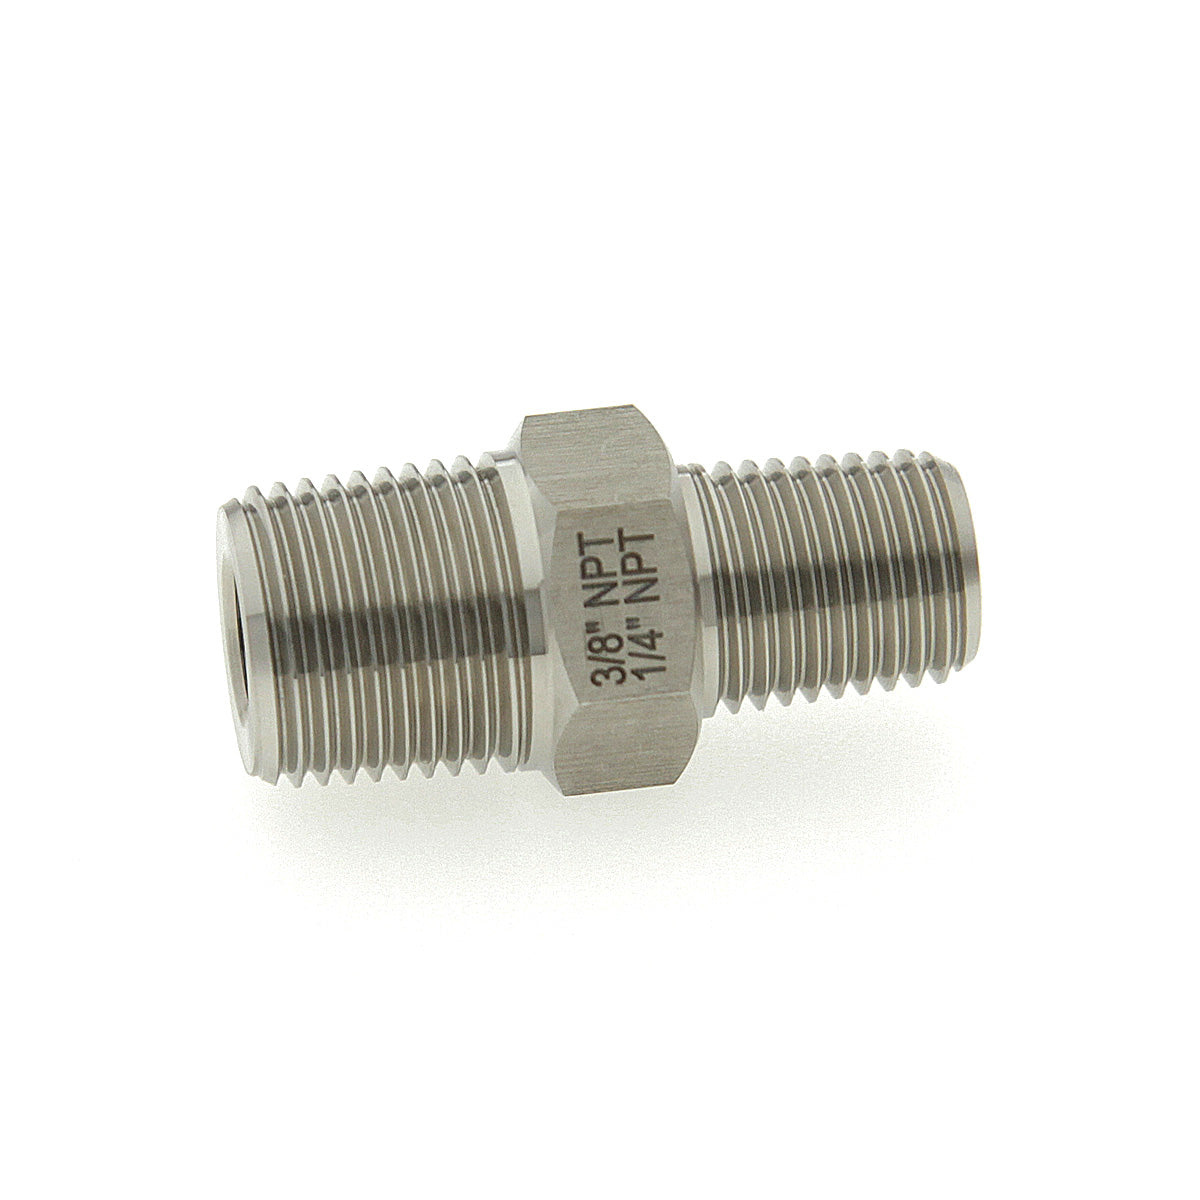 Reducers and Straight Hex Nipple Connectors